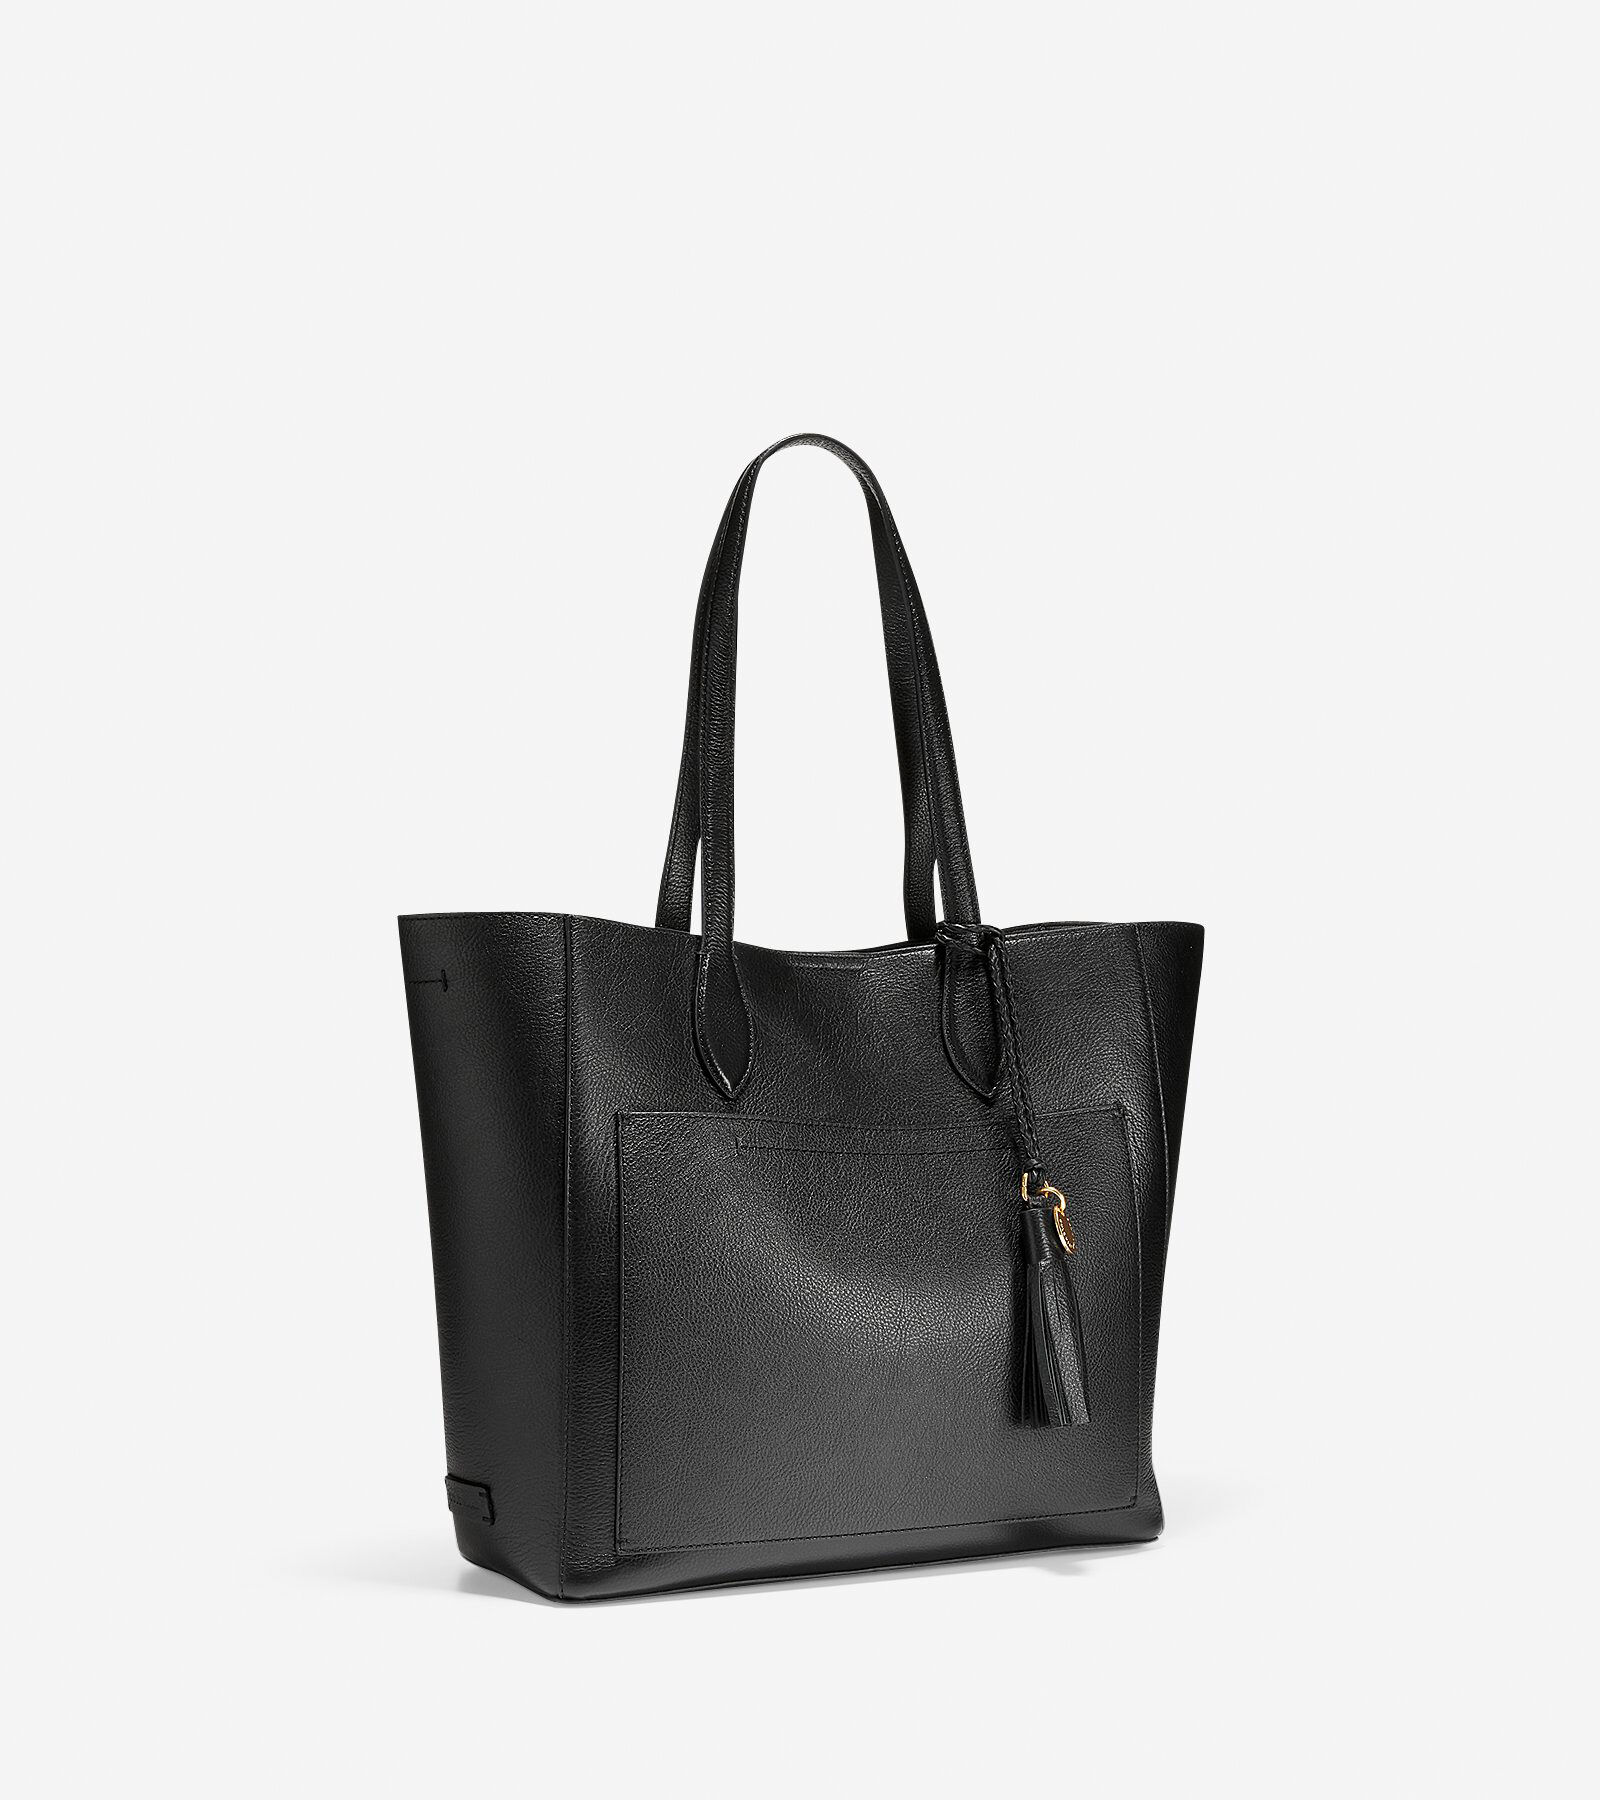 Sale > marks and spencer handbags sale > is stock